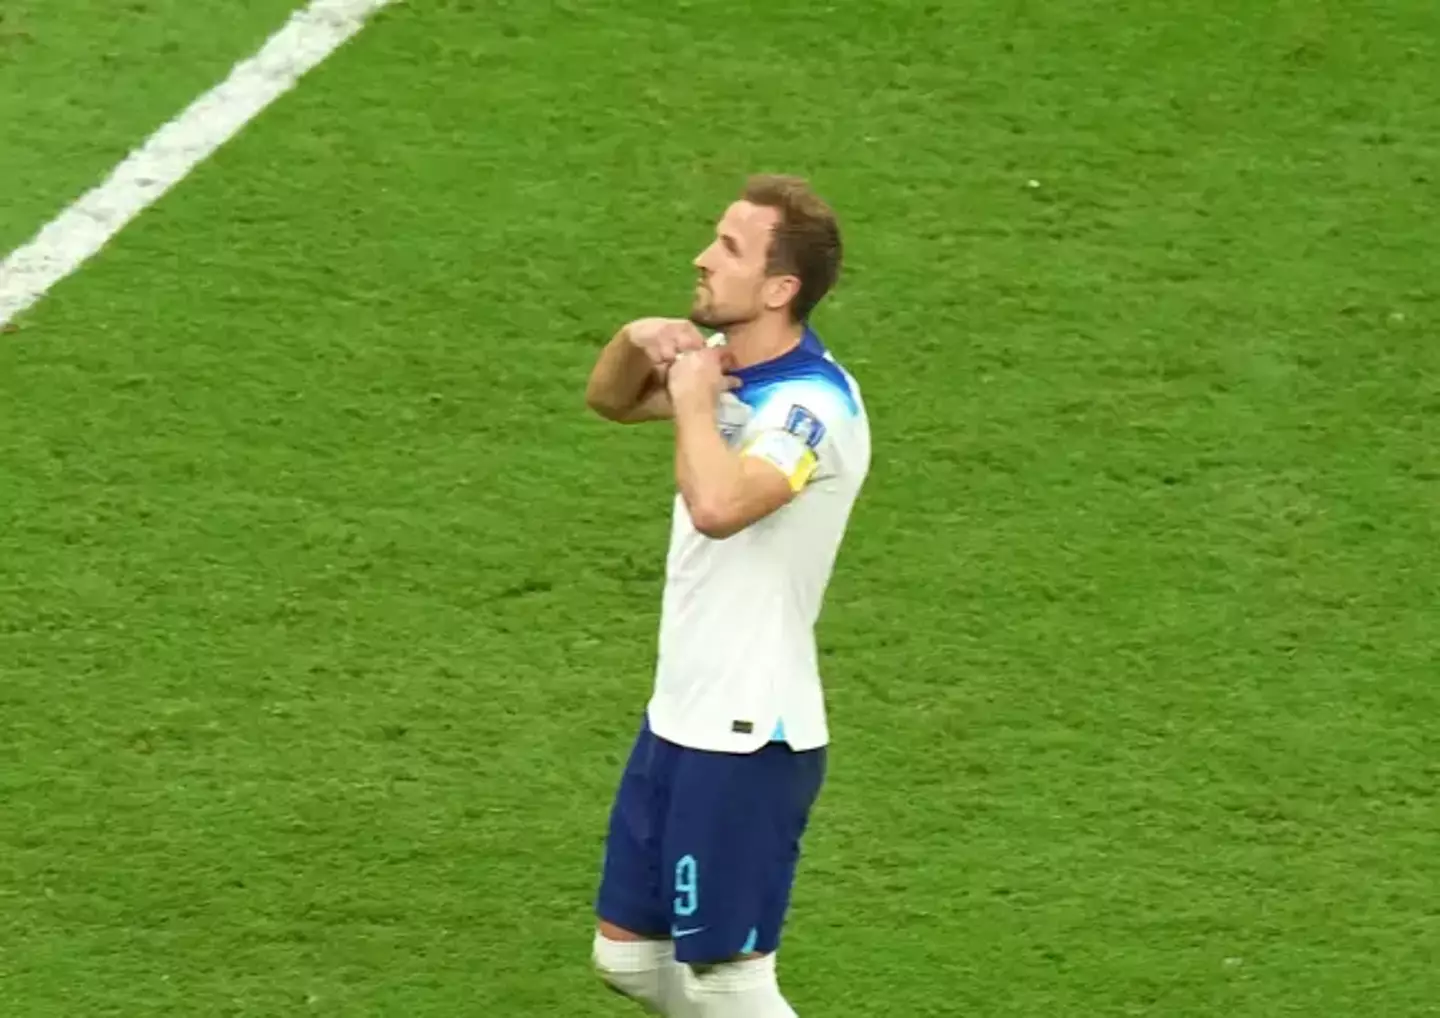 England have bowed out of the World Cup, but fans had some harsh words about the referee.